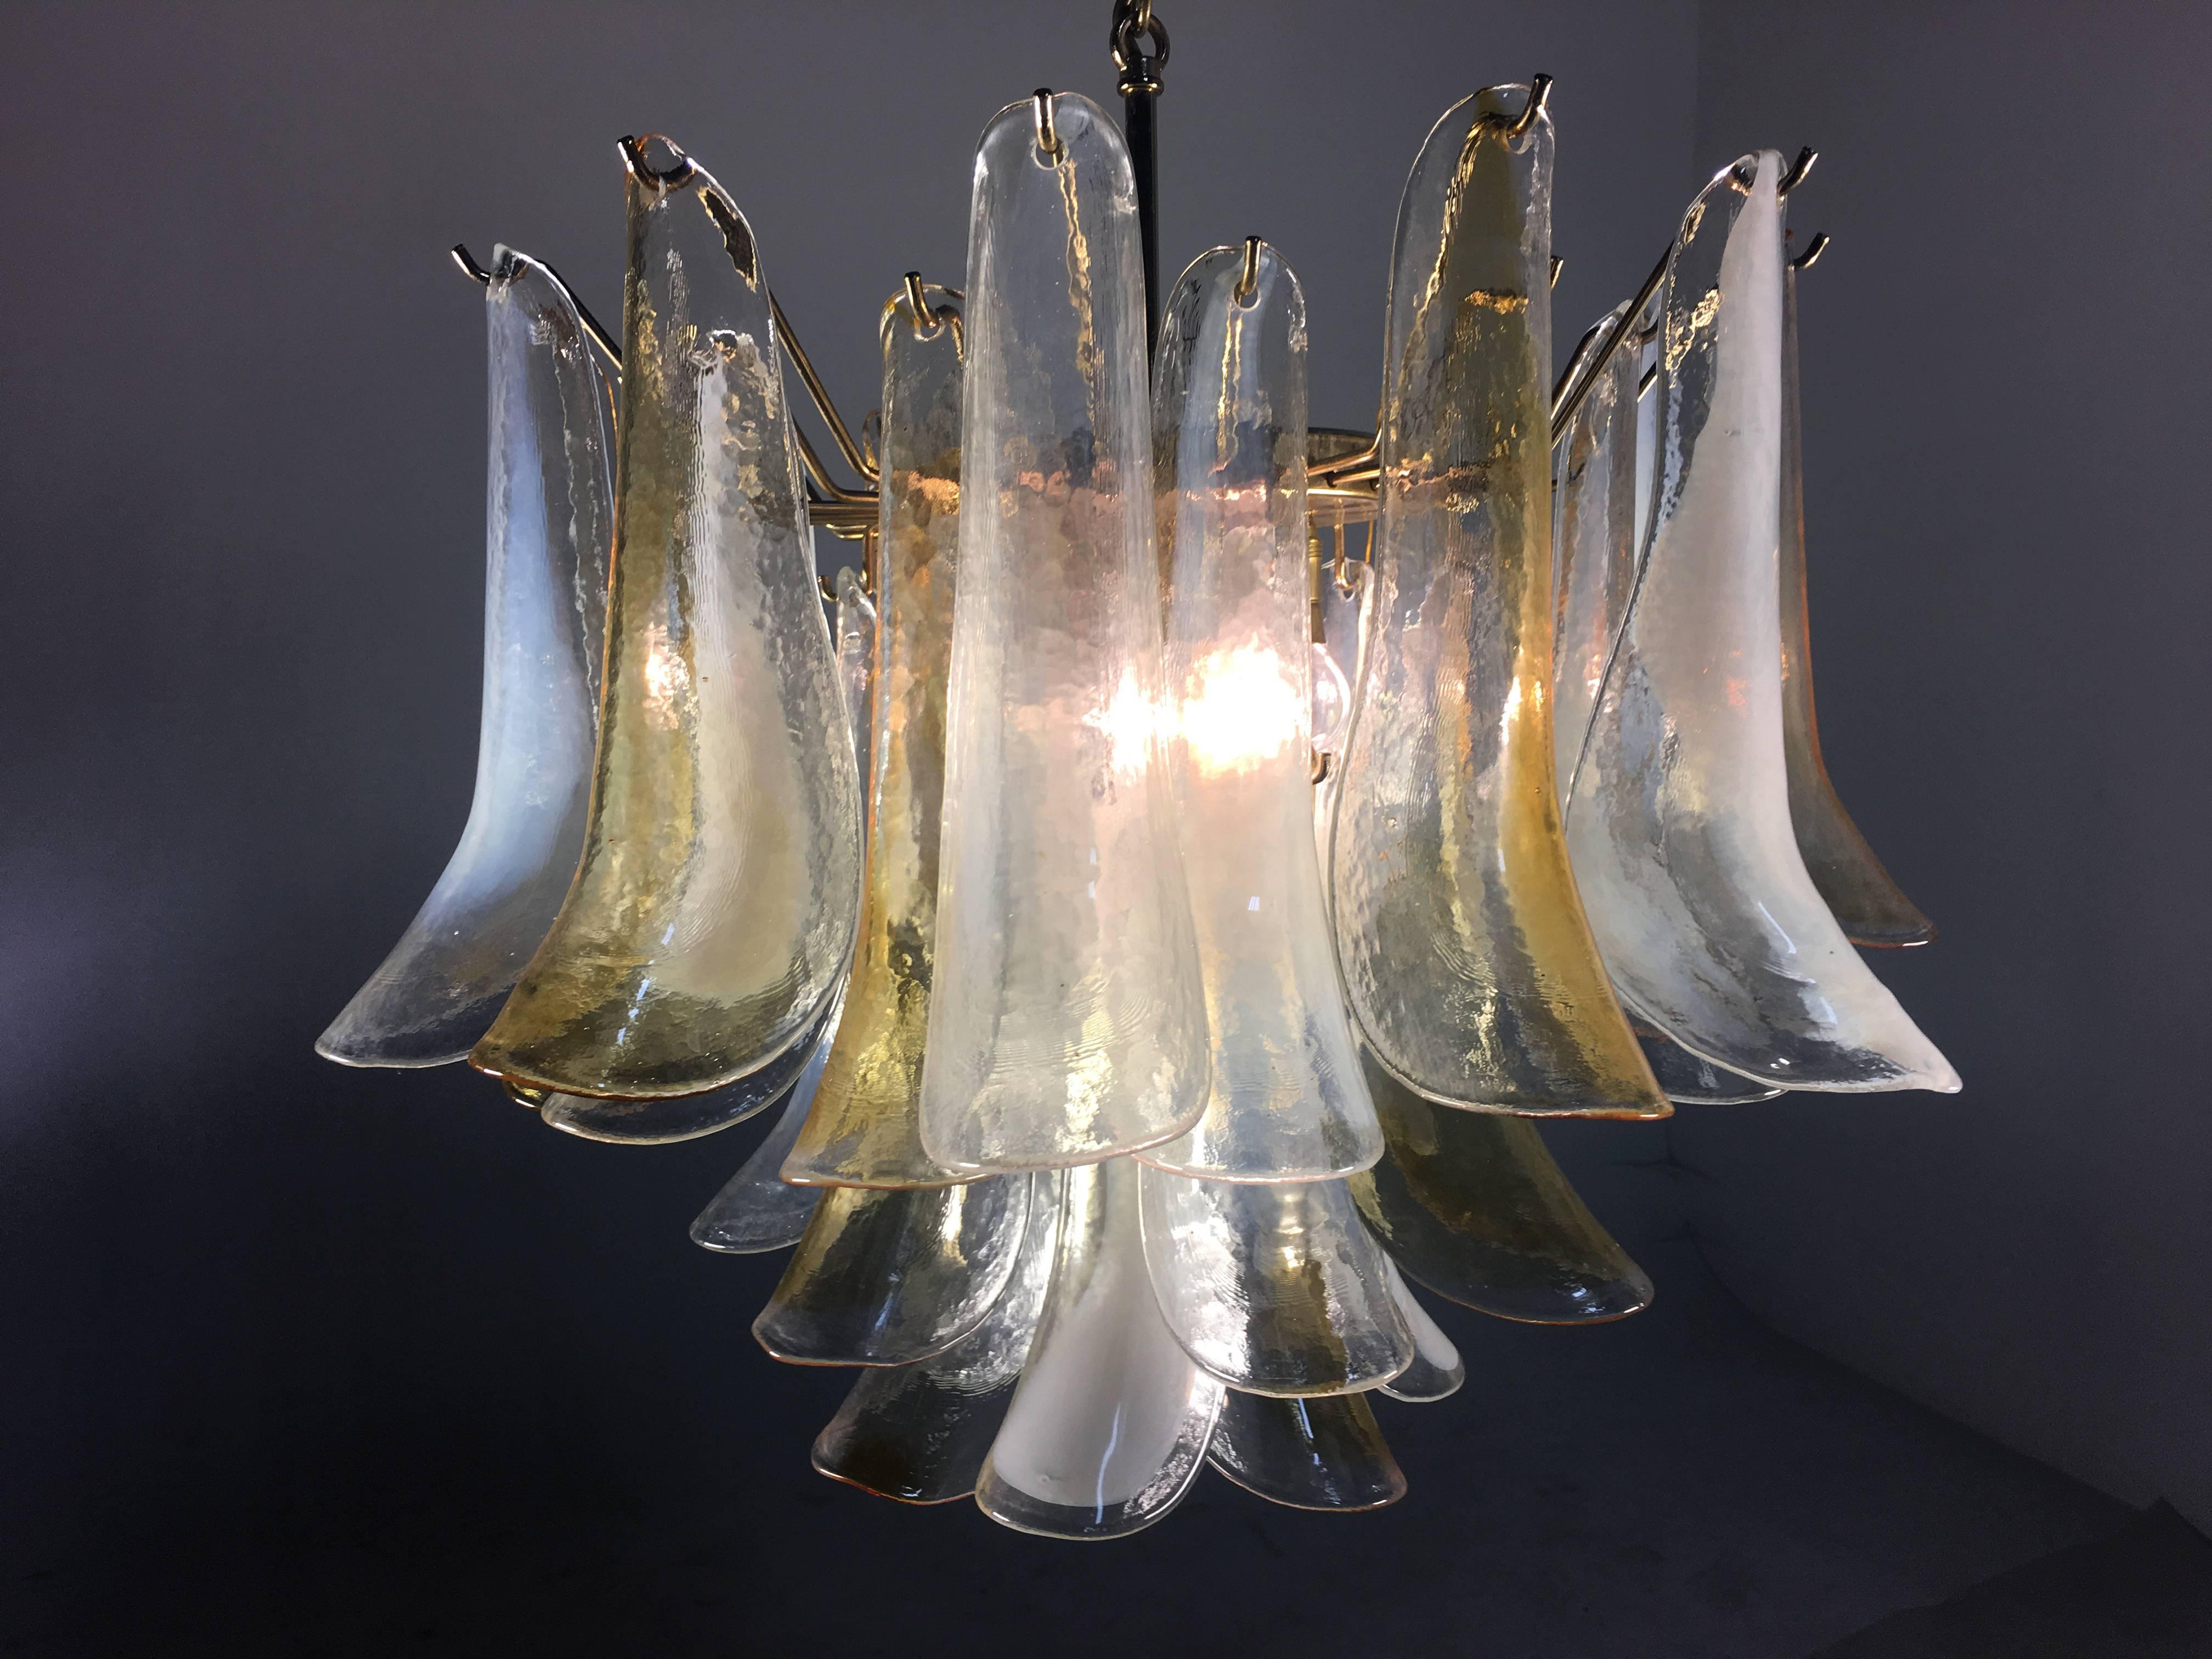 Italian Elegant Pair of Chandeliers White and Amber Petals, Murano, 1990s For Sale